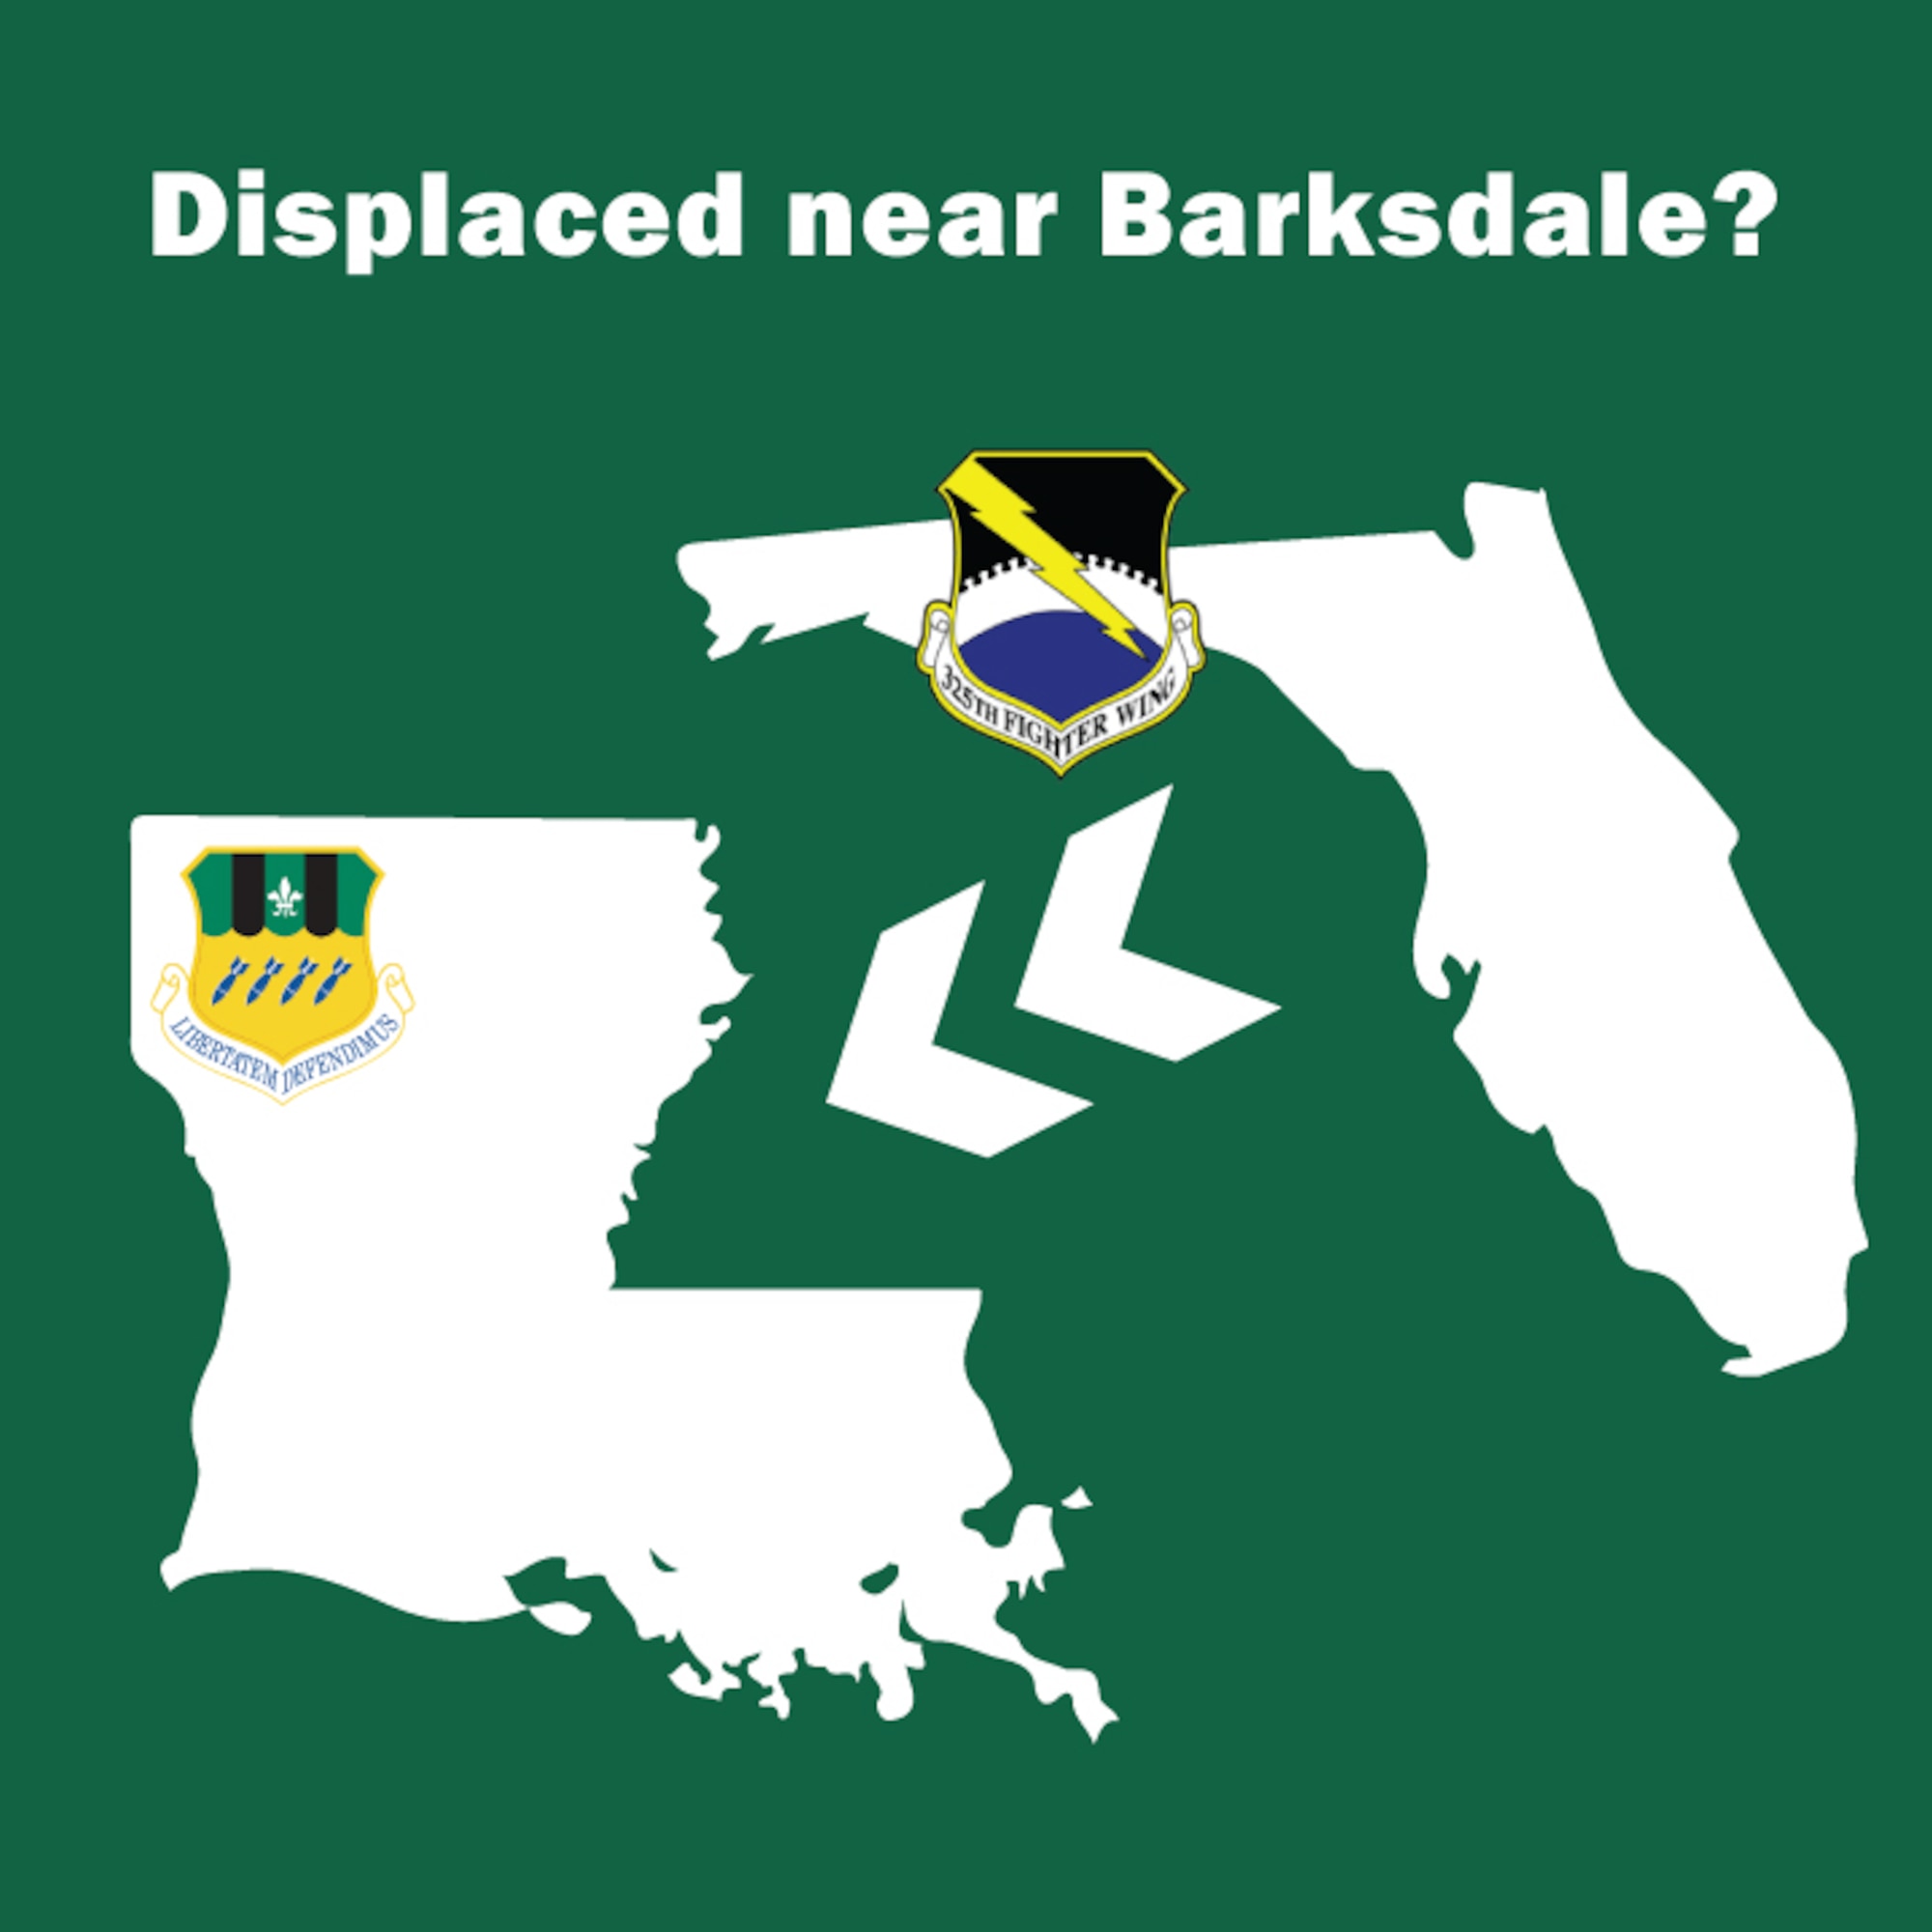 Barksdale support Tyndall evacuees